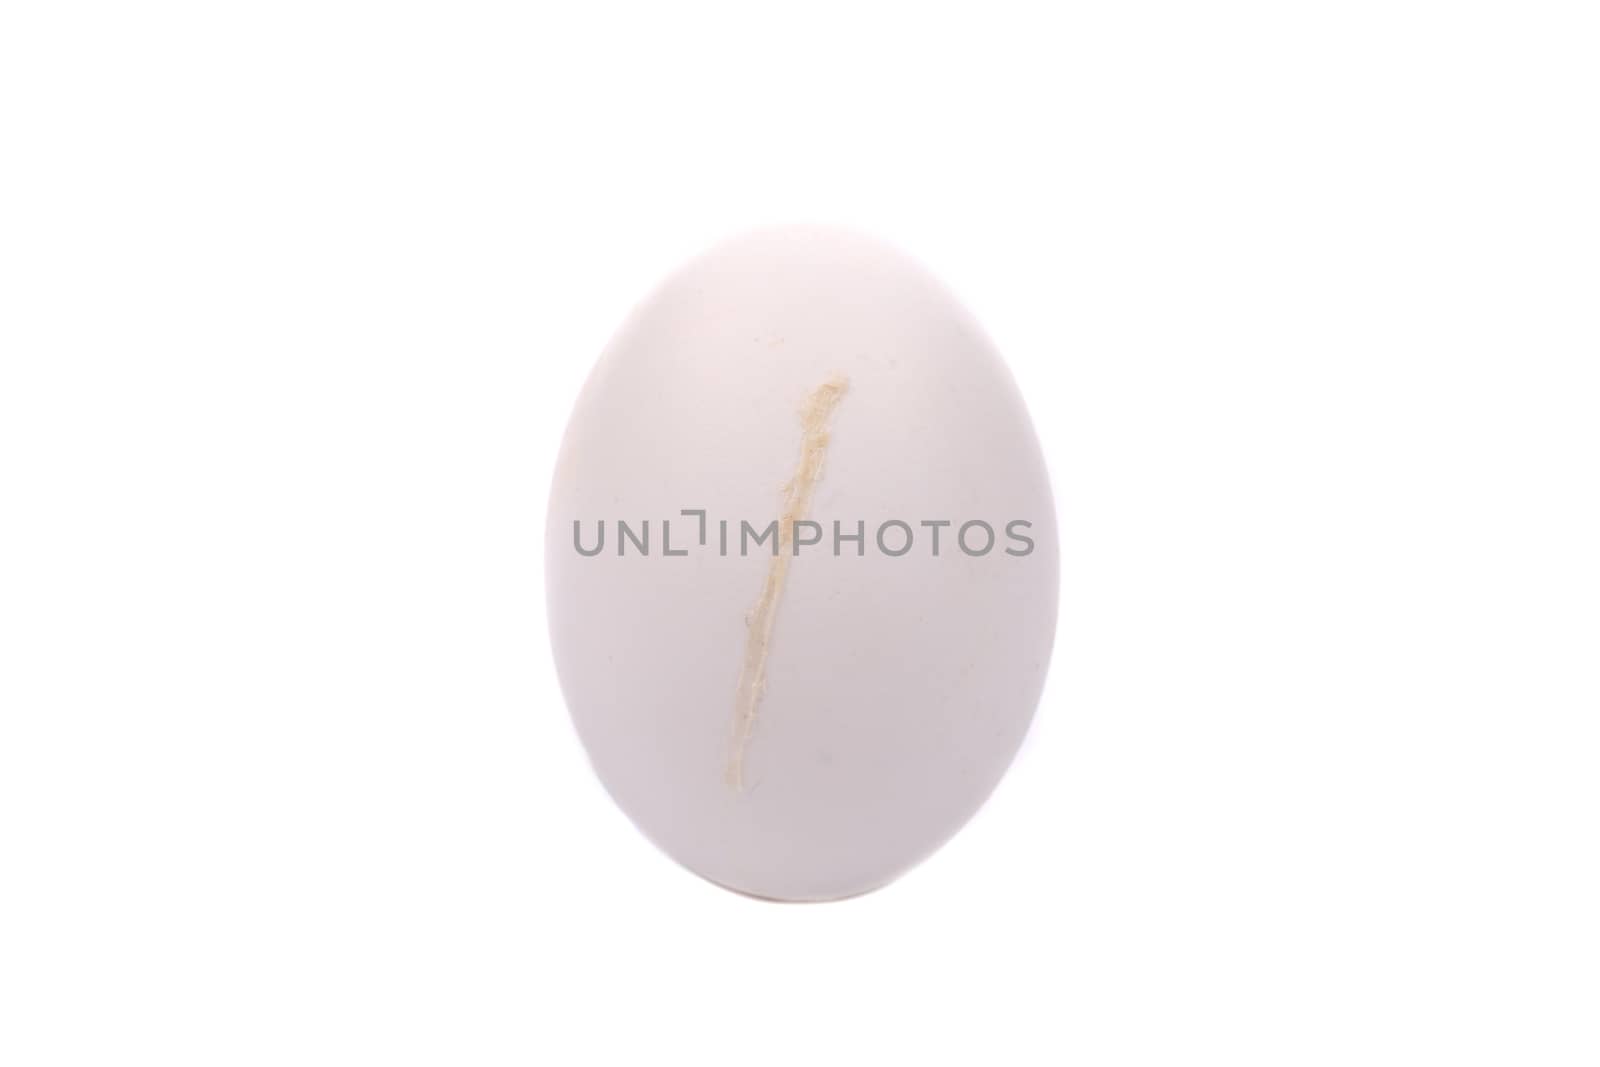 Dirty chicken egg. Isolated on a white background.